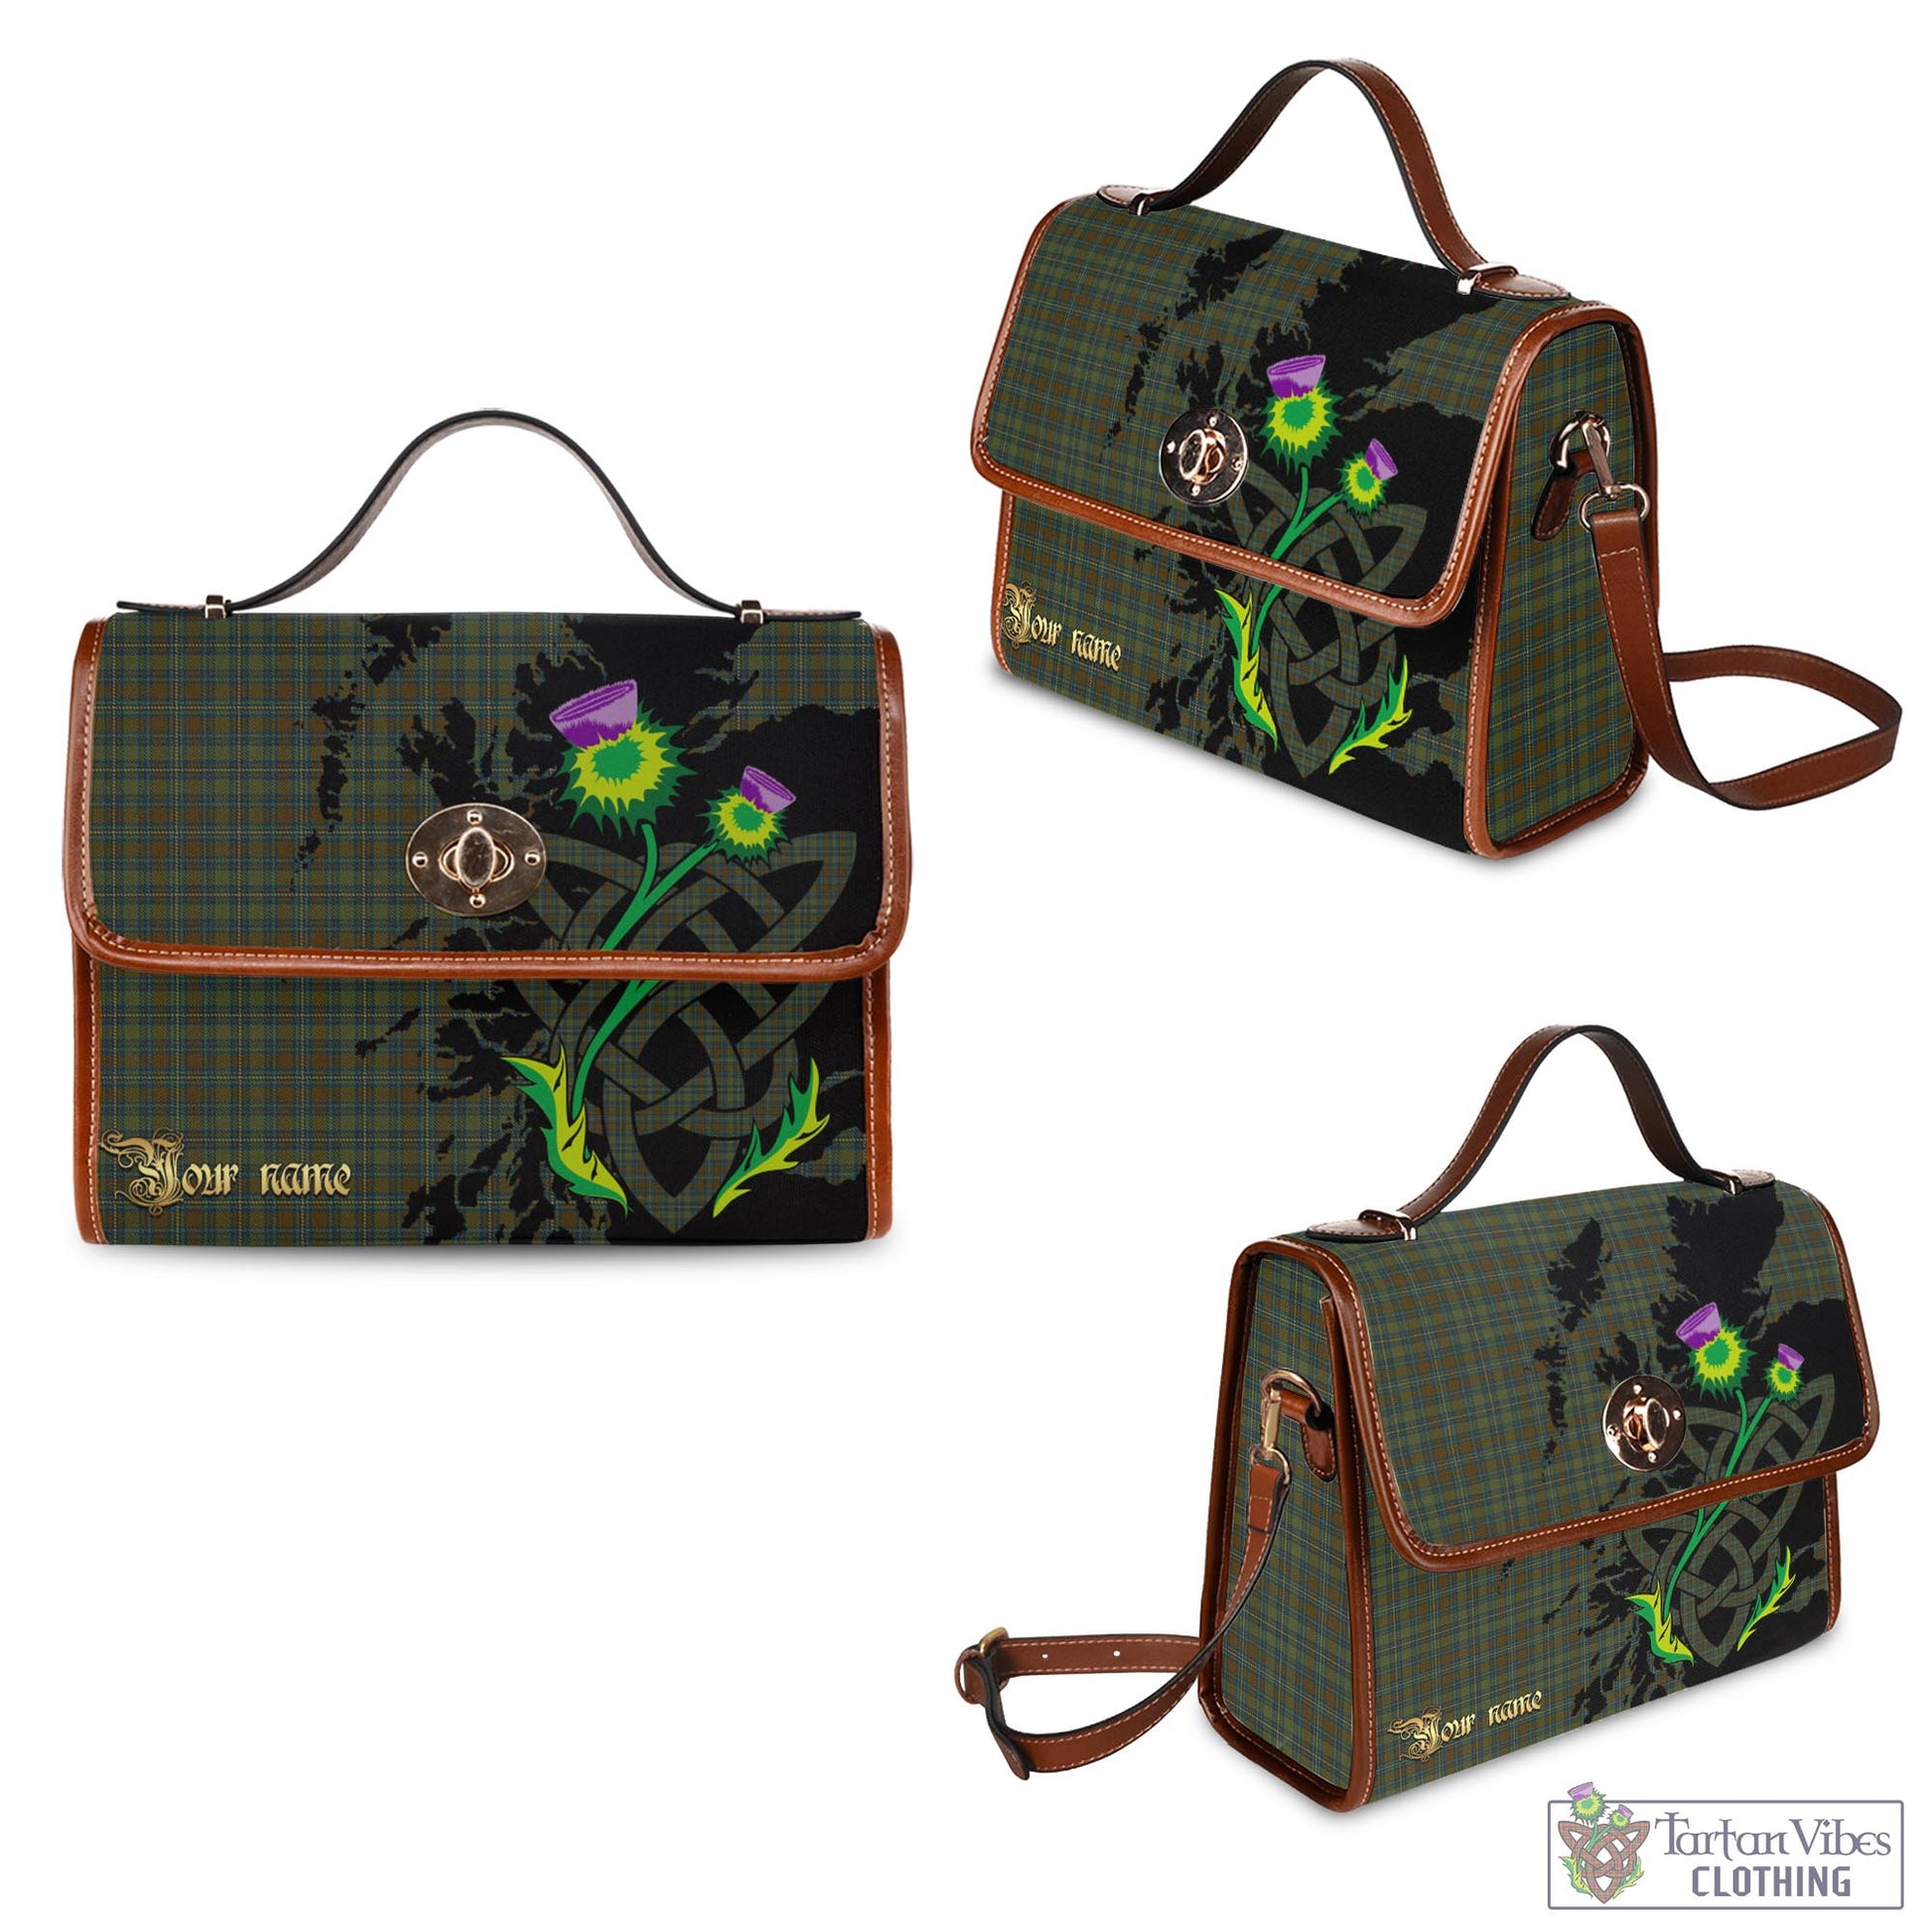 Tartan Vibes Clothing Kerry County Ireland Tartan Waterproof Canvas Bag with Scotland Map and Thistle Celtic Accents